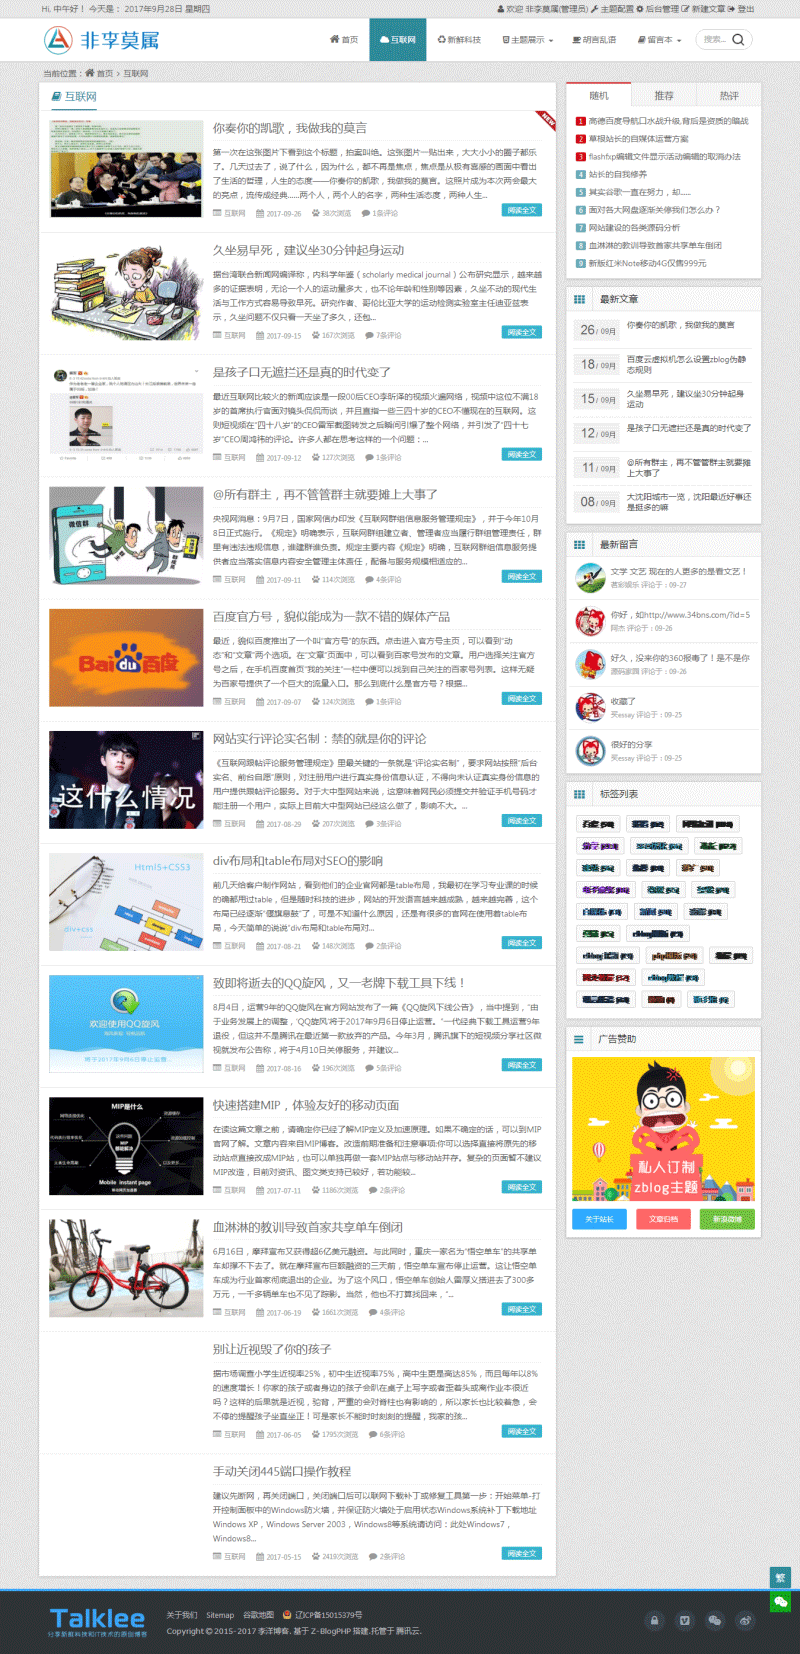  Li Yang's personal blog "mxlee" zblog theme - dreamer (recommended products) page 40